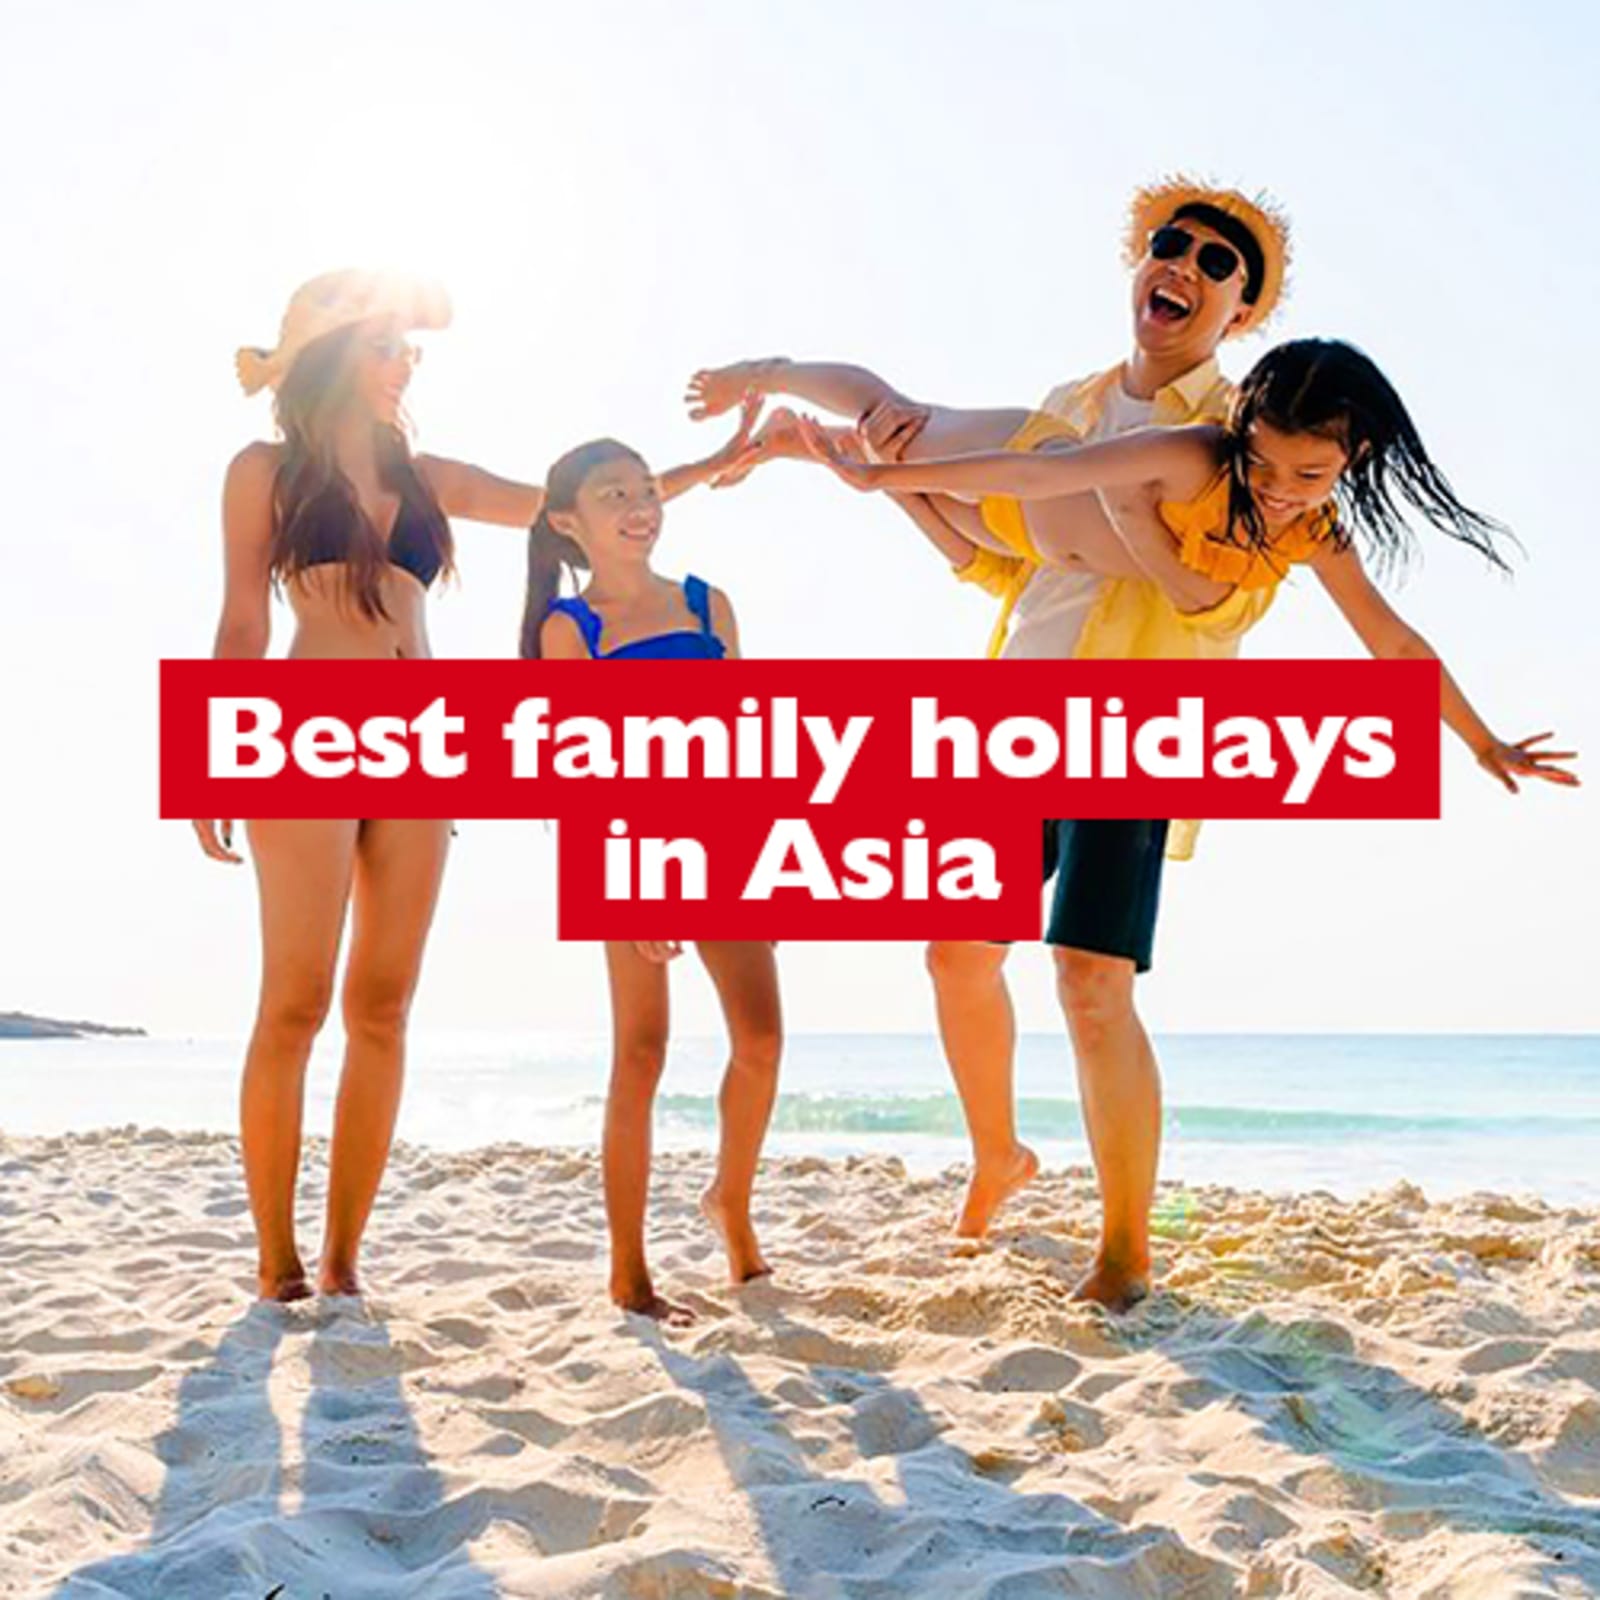 Best family holidays in Asia